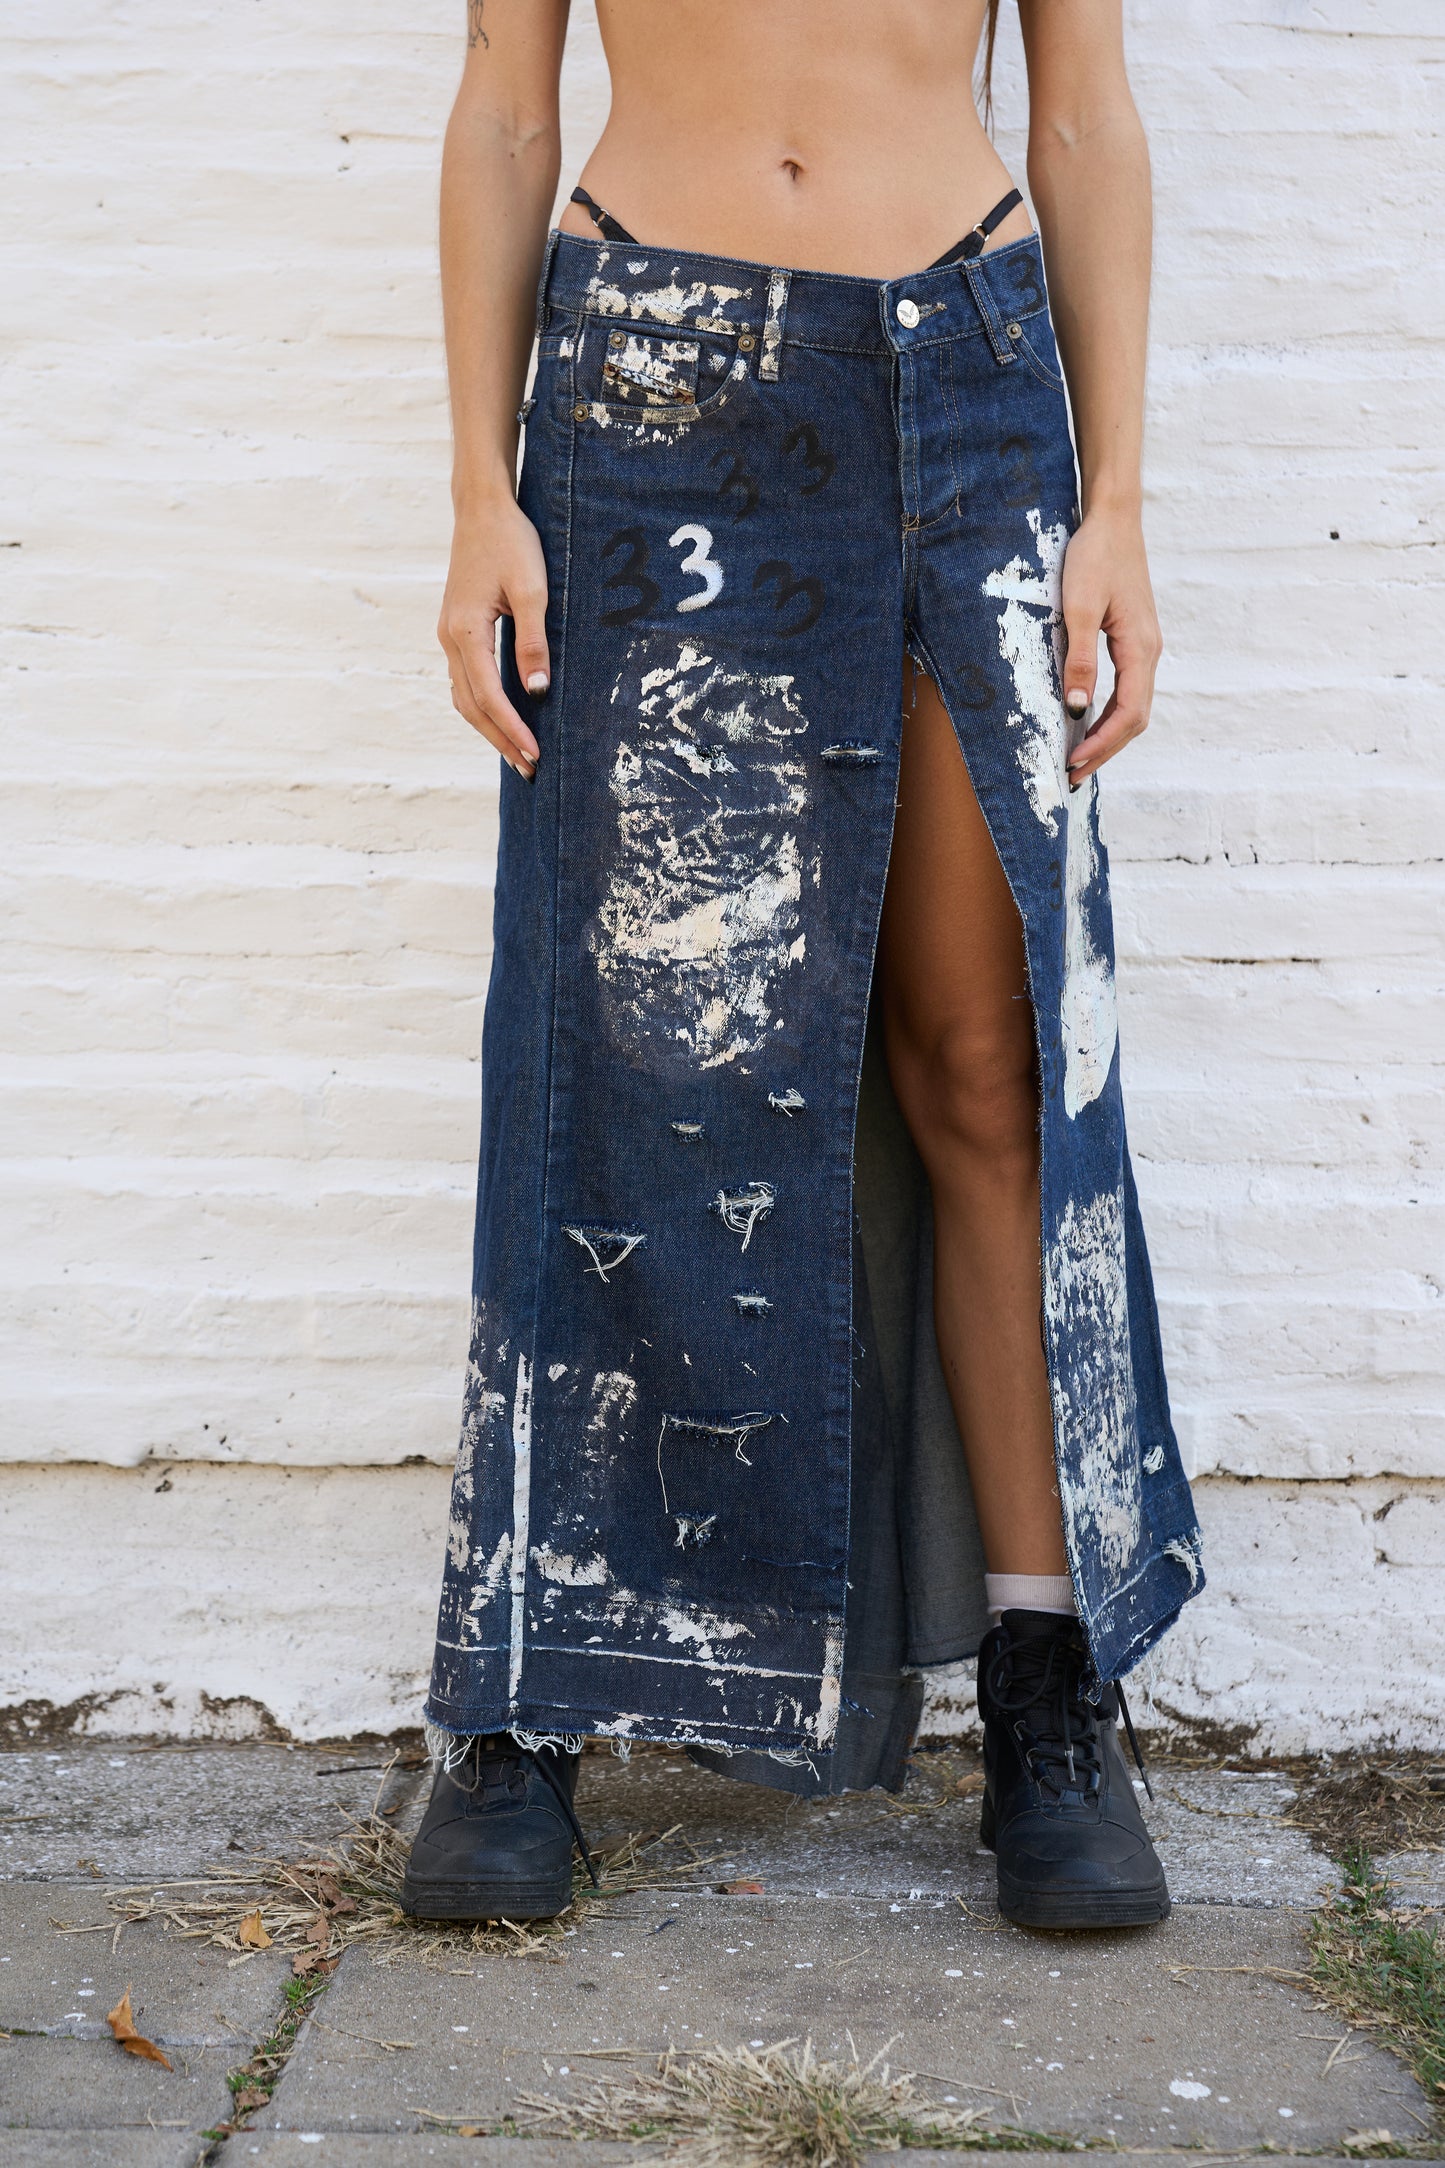 Upcycled Jeans Skirt [1]